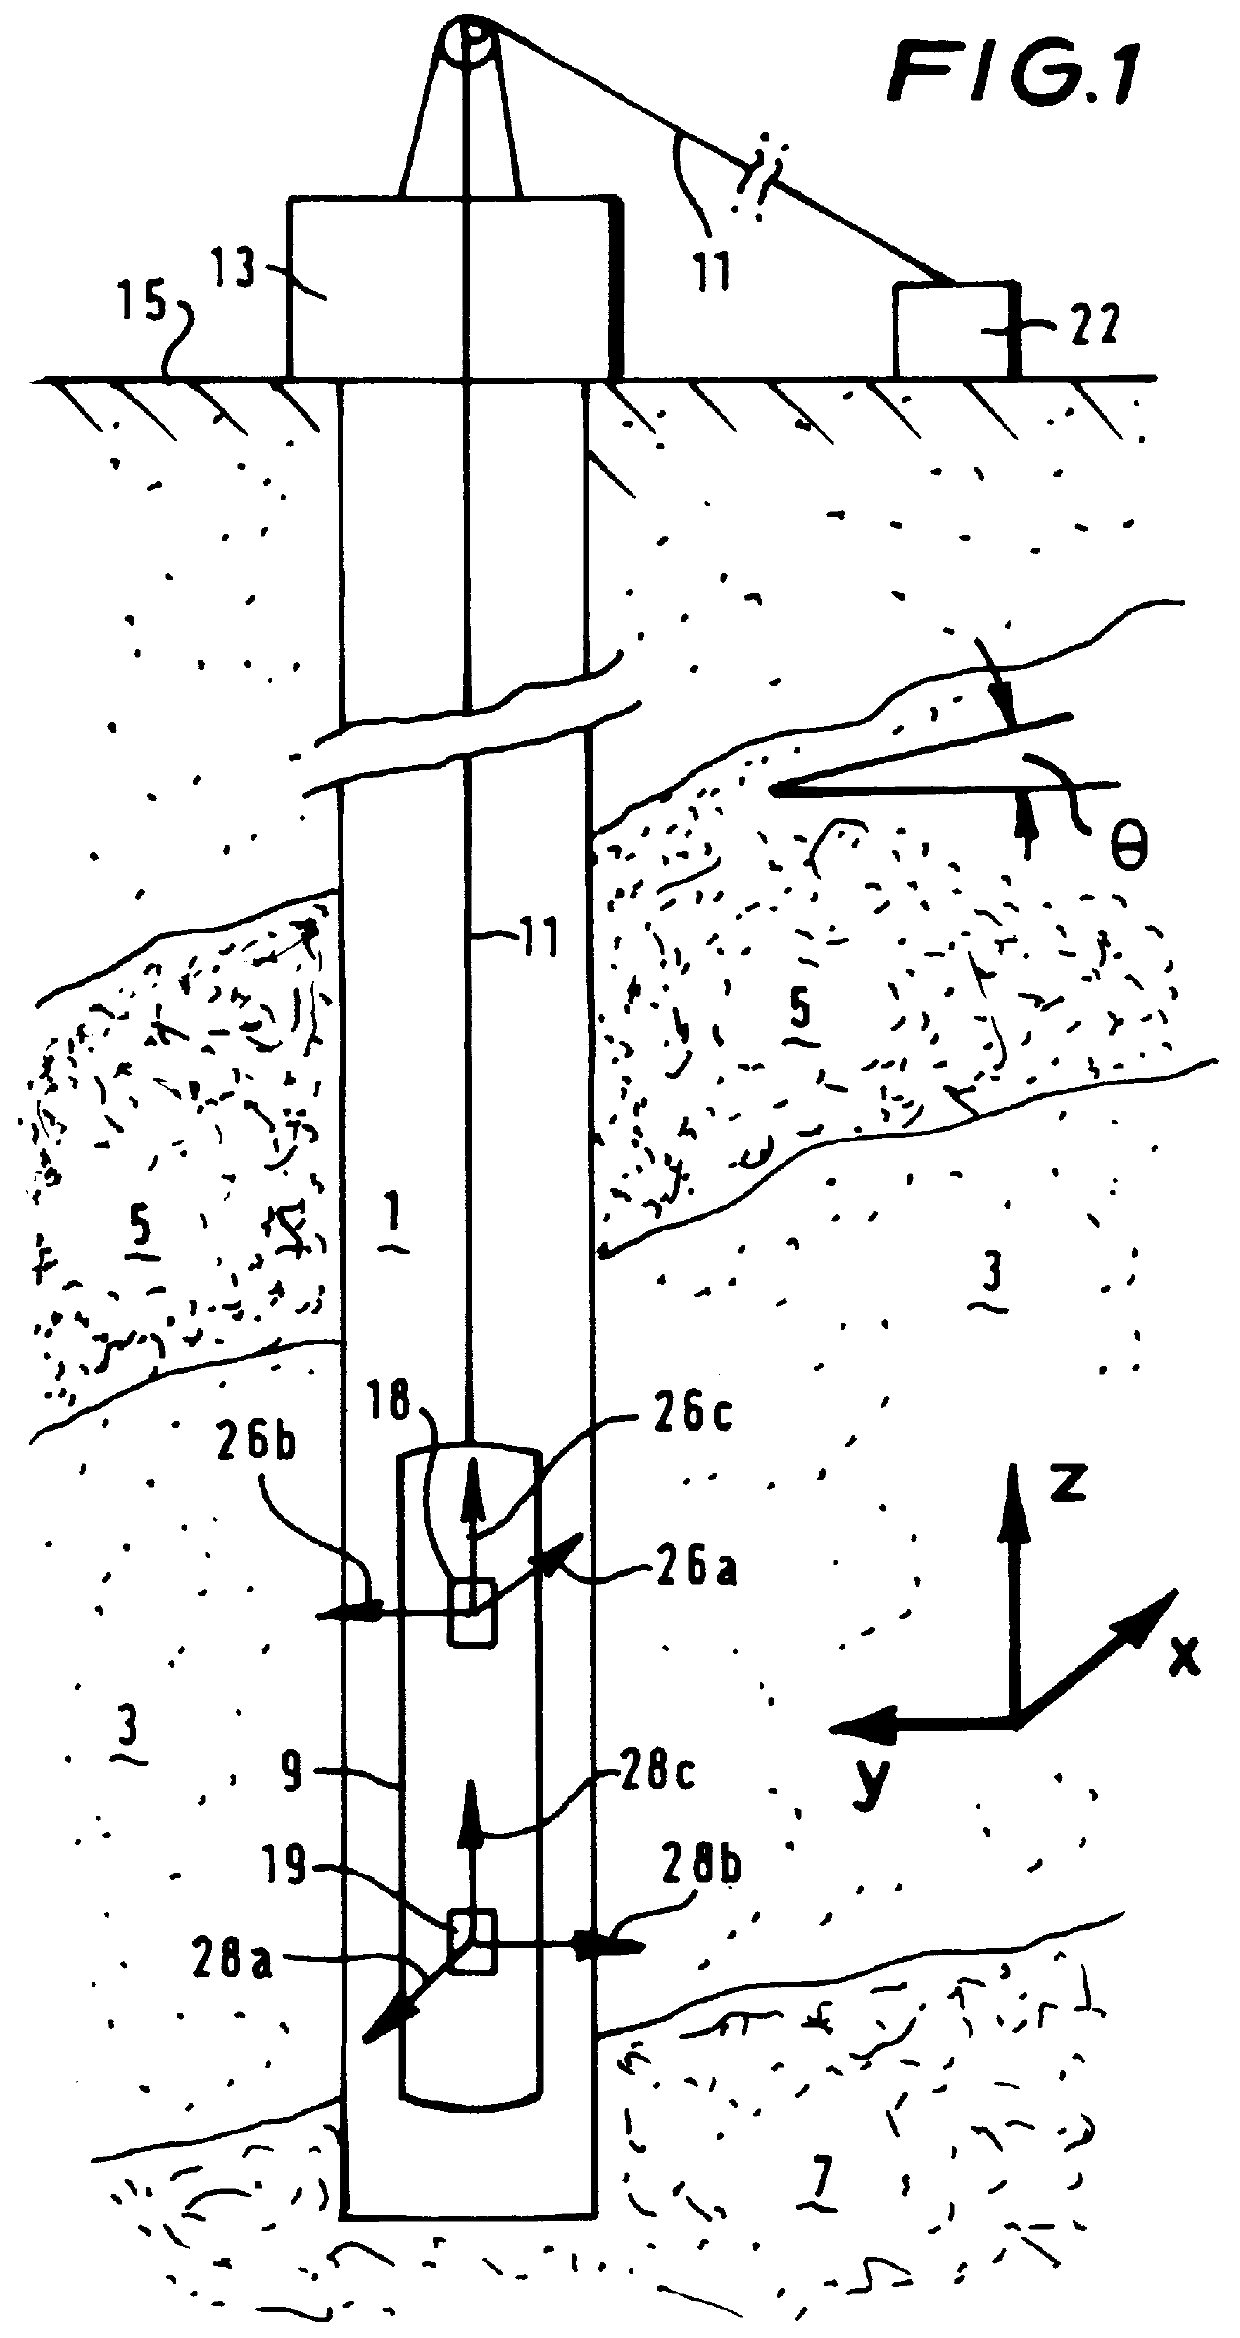 Determining electrical conductivity of a laminated earth formation using induction logging